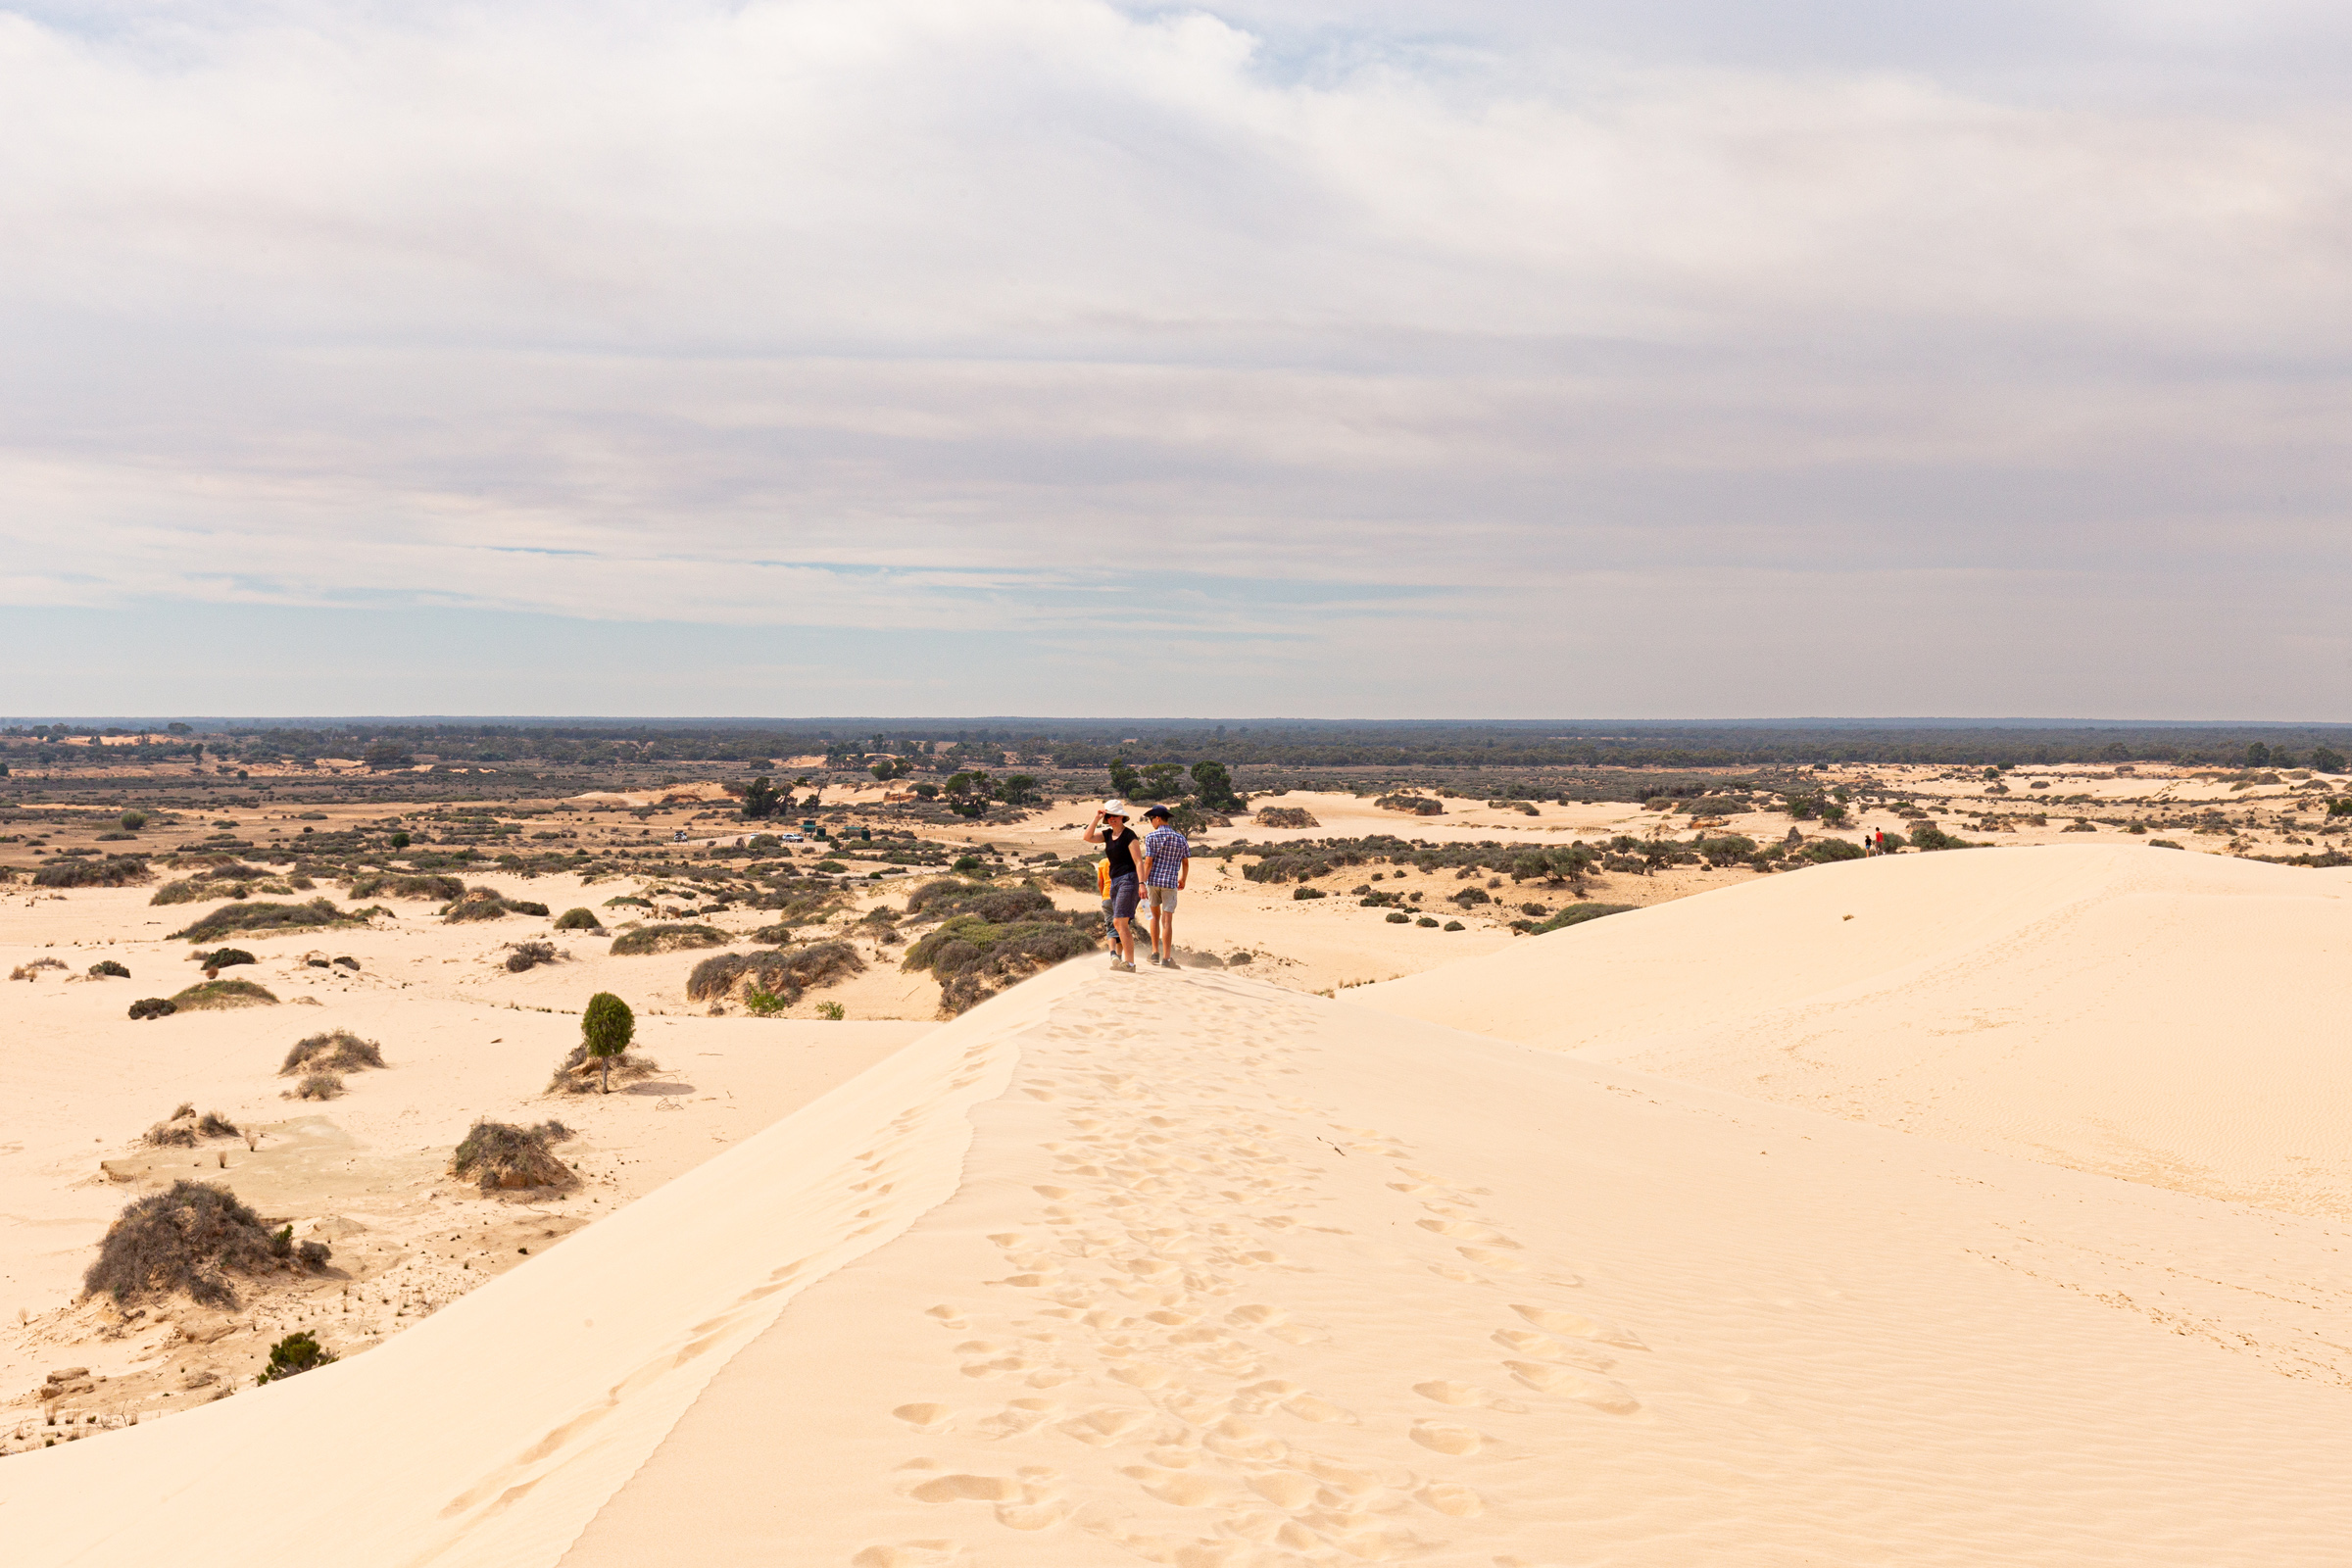 People standing on a sand dune